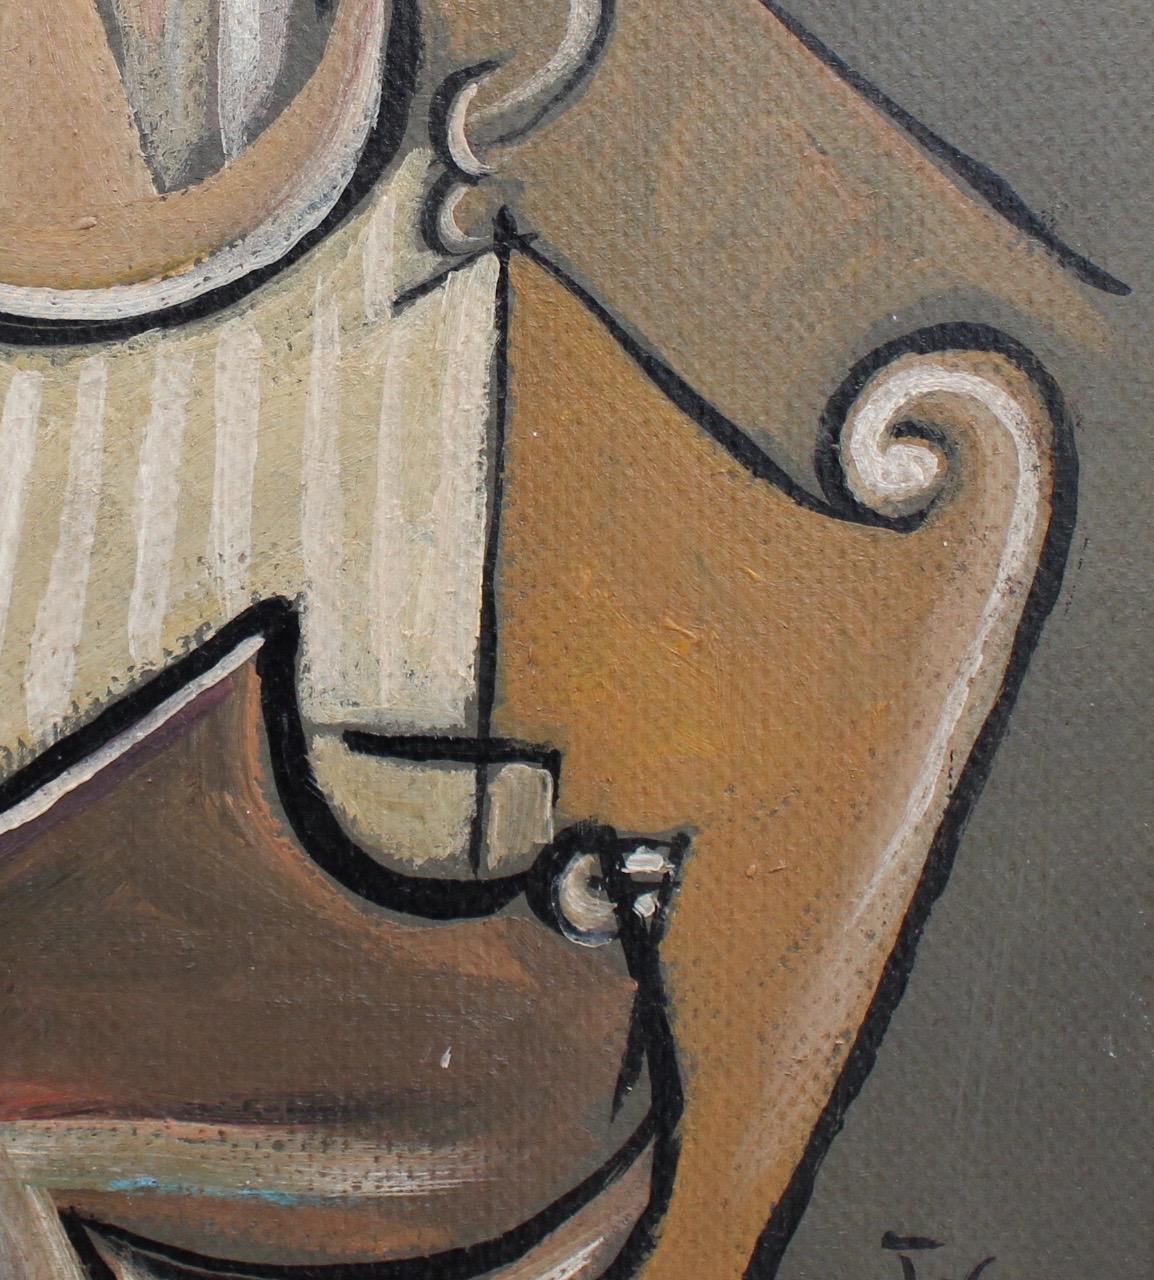 'Musician with Harp', oil on board, by artist with initials, J.G. (circa 1940s - 1960s). Clearly inspired by Georges Braque's (1882 - 1963) works, this painting is similar to experimental representations by both Braque and Picasso which challenged